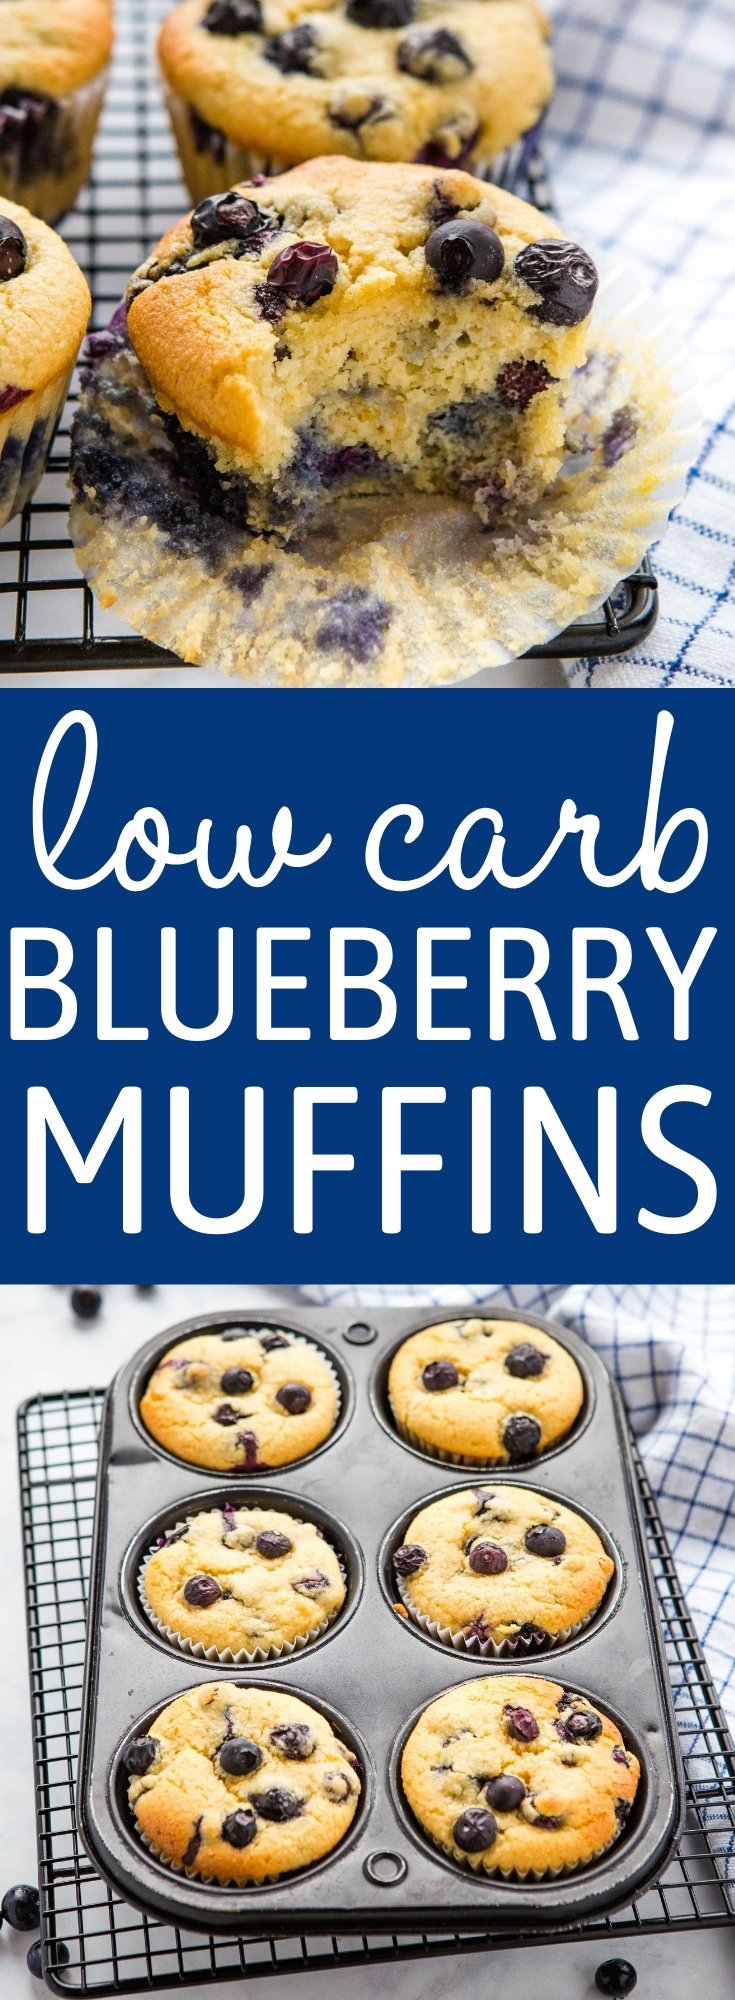 Best Ever Low Carb Blueberry Muffins Recipe Pinterest